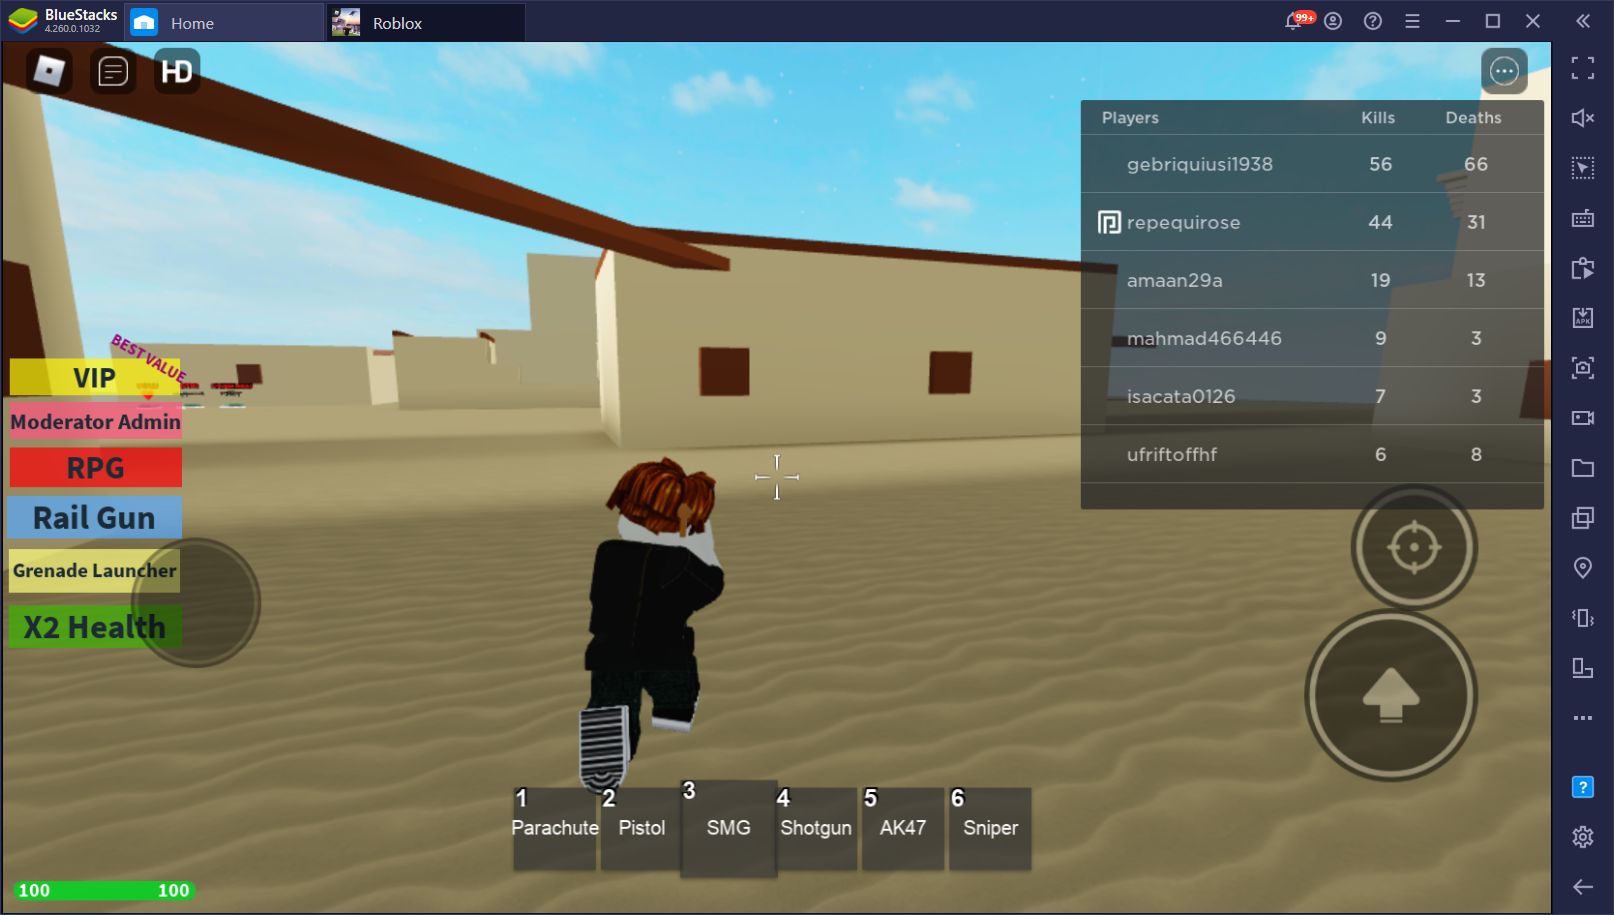 The Best Roblox Games to Play in 2021